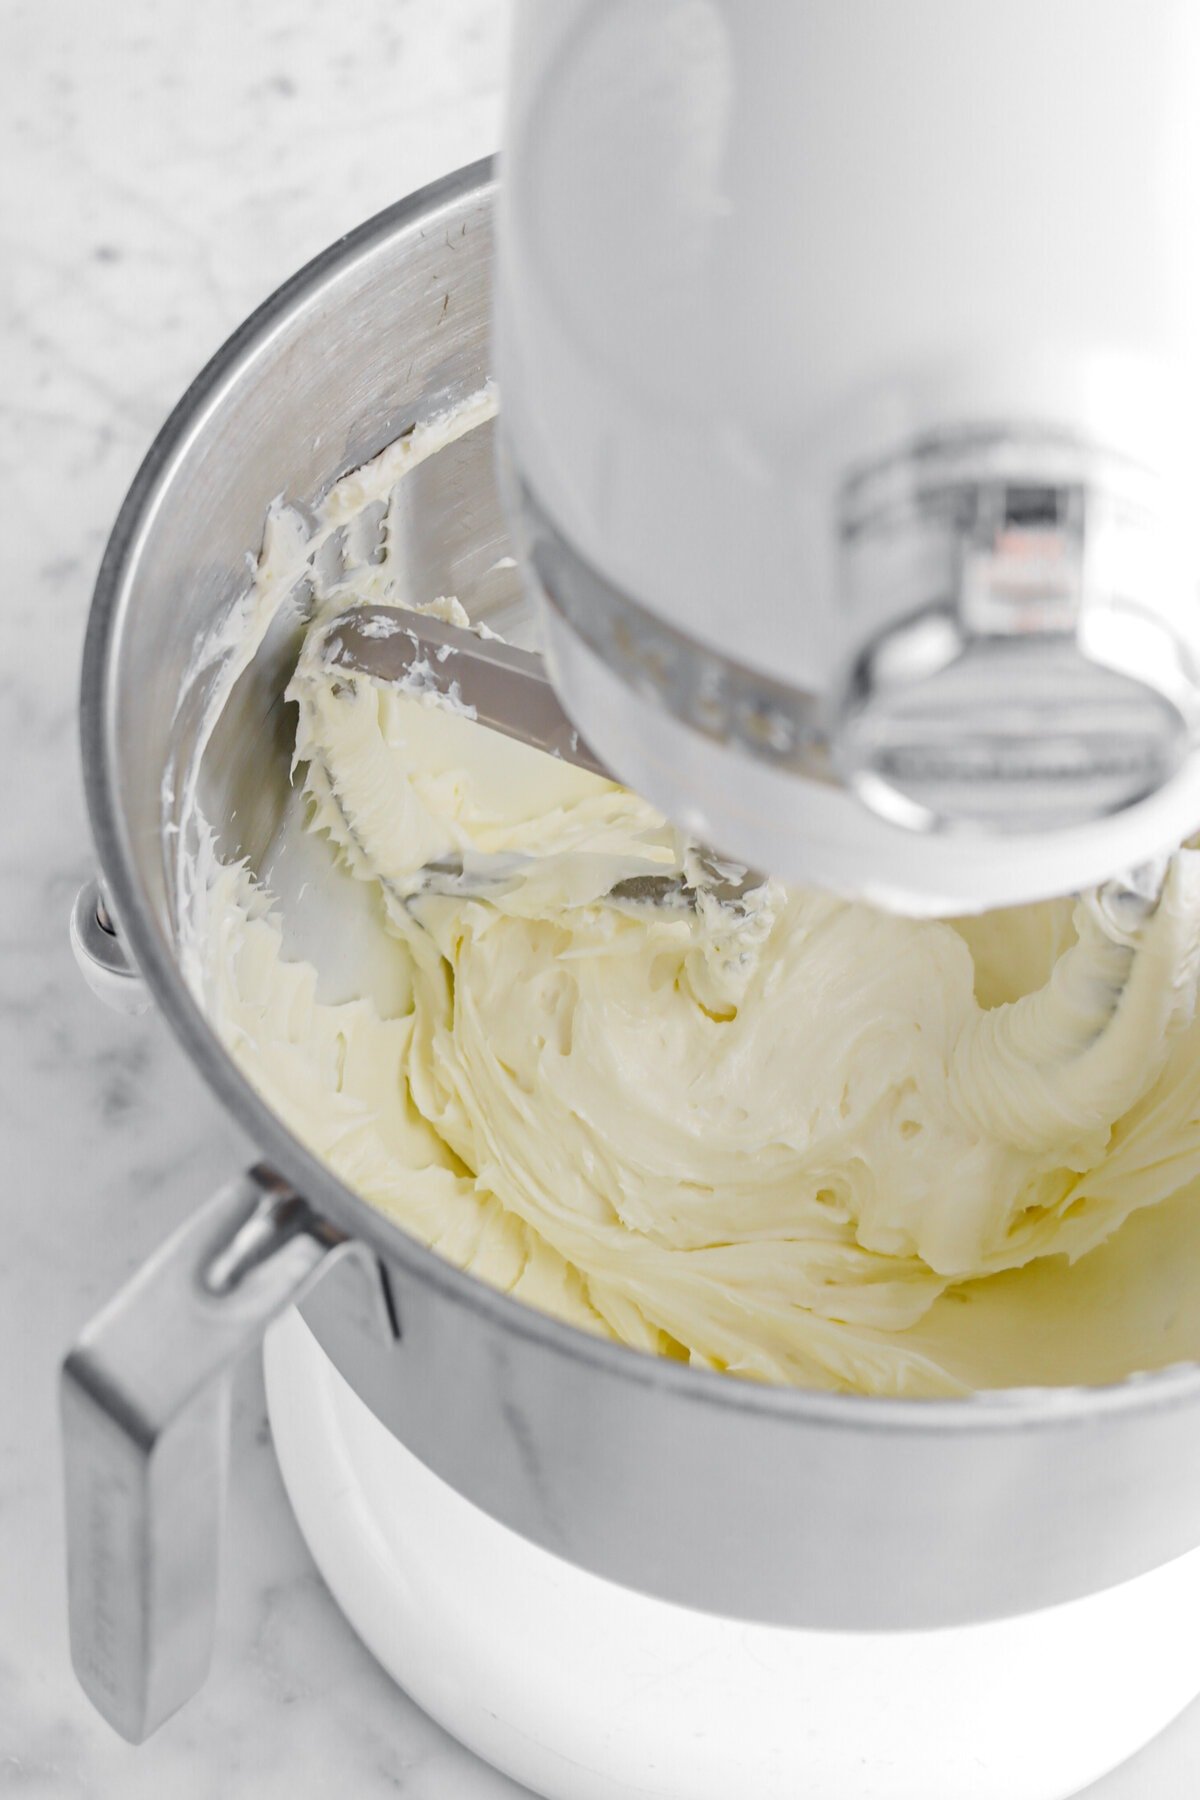 cream cheese mixture in stand mixer.